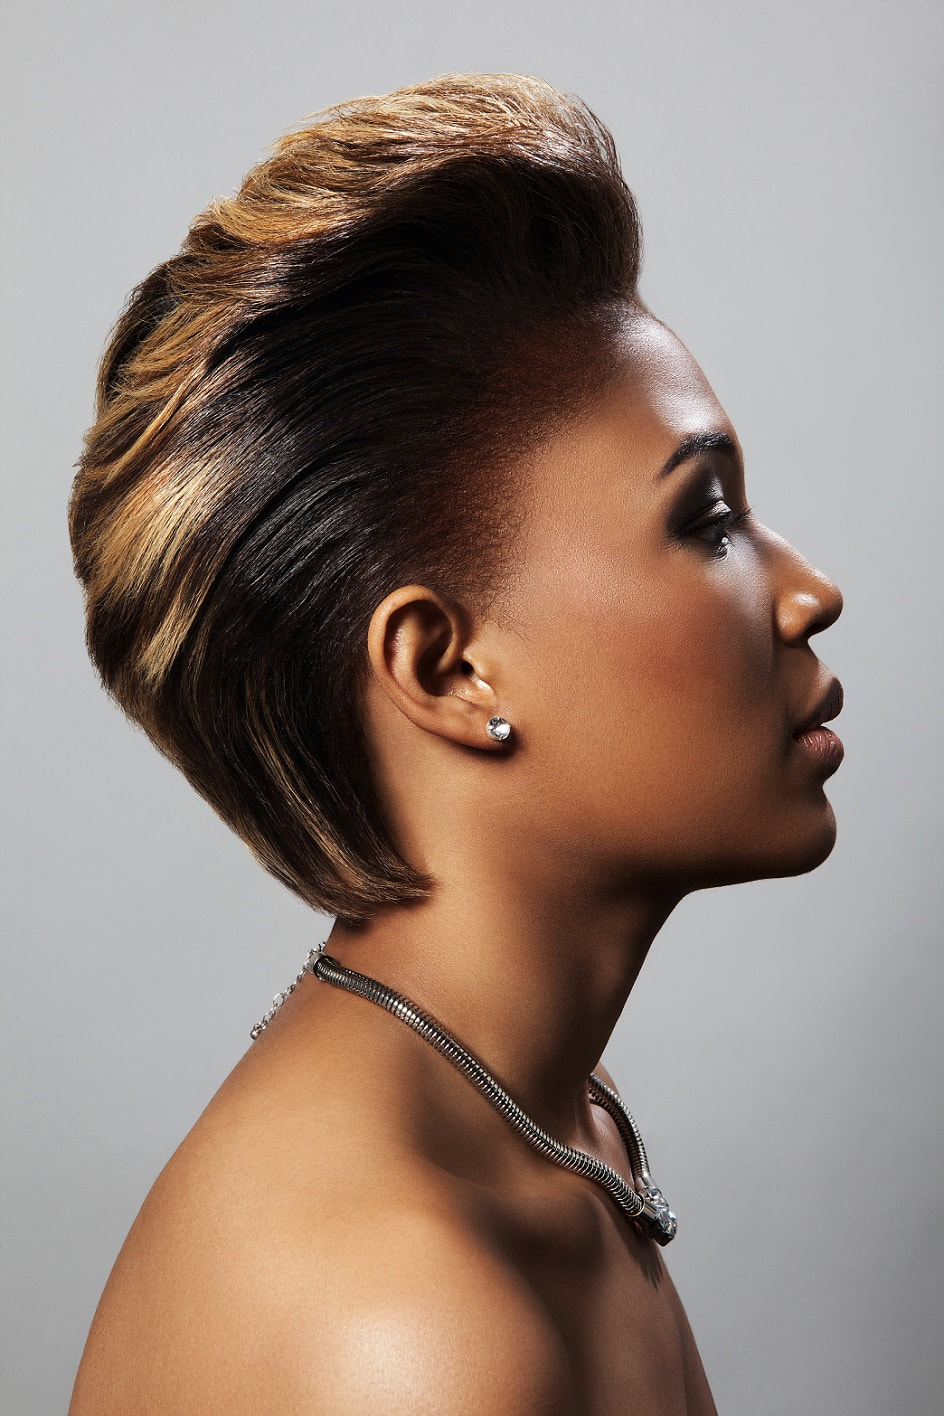 Black female, modelling her hair that has been cut short and is slicked back at the sides with a quif at the front. The hair has been been dyed a golden brown colour.